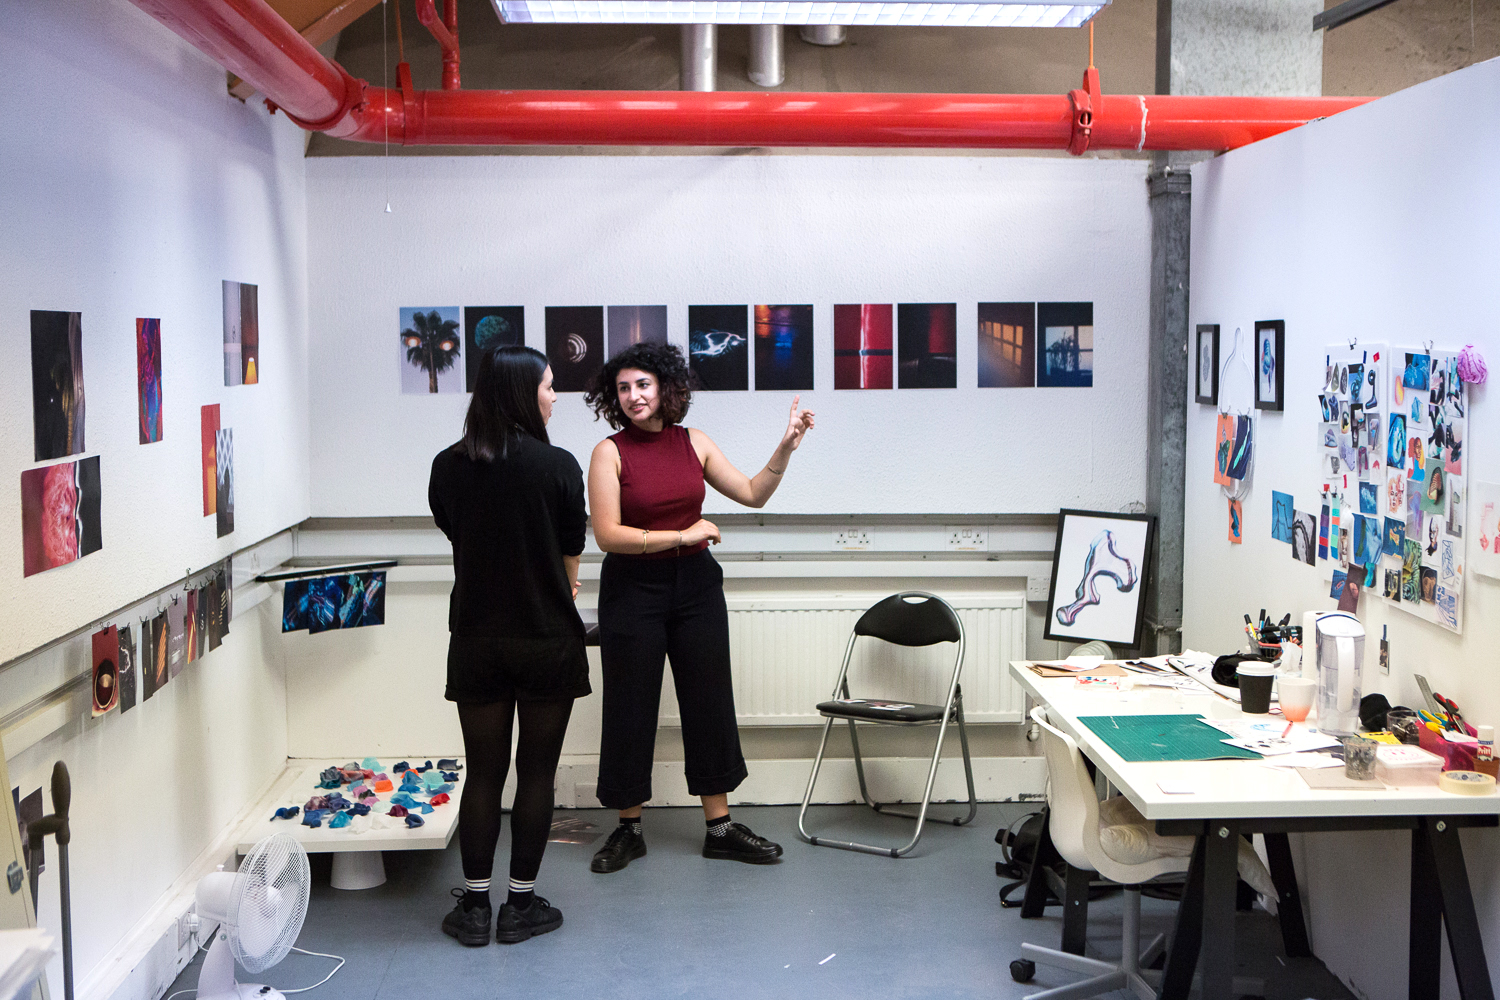 An artist shows someone their work in a studio with photographs on the walls